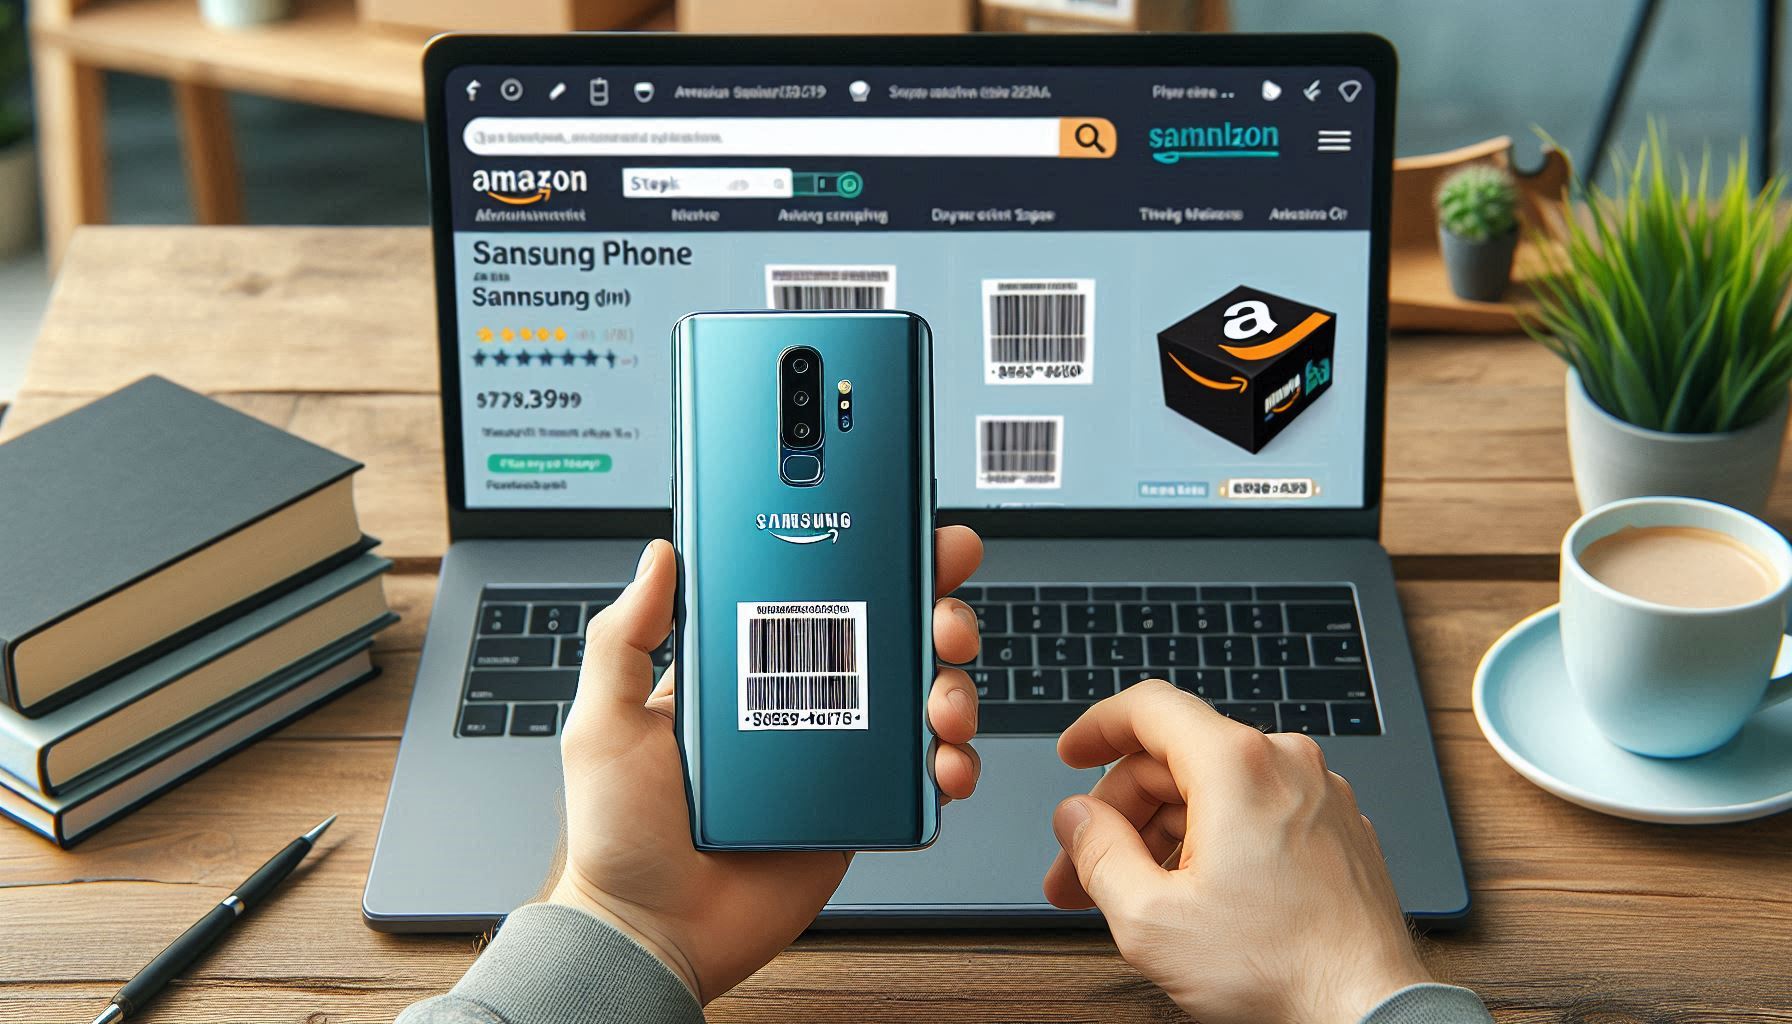 How to Sell Samsung Phone on Amazon FBA